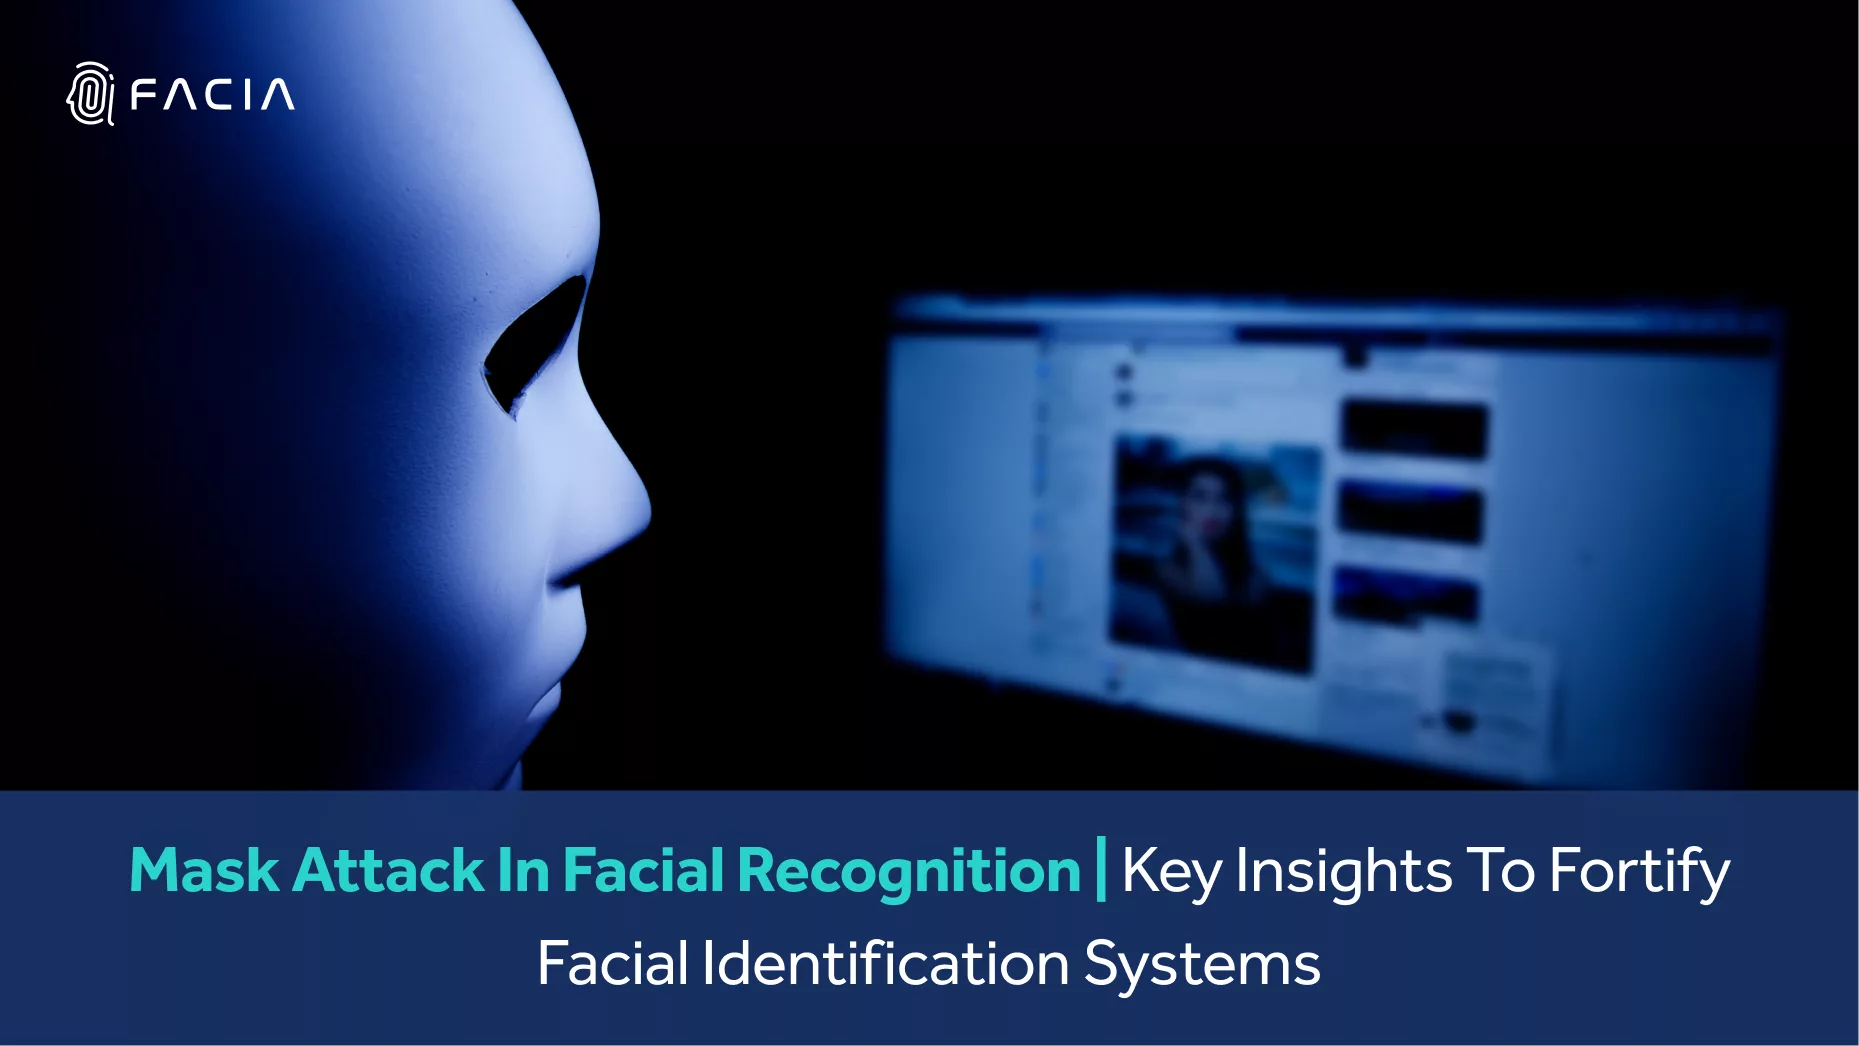 Mask Attack in Facial Recognition – Key Insights to Fortify Facial Identification Systems